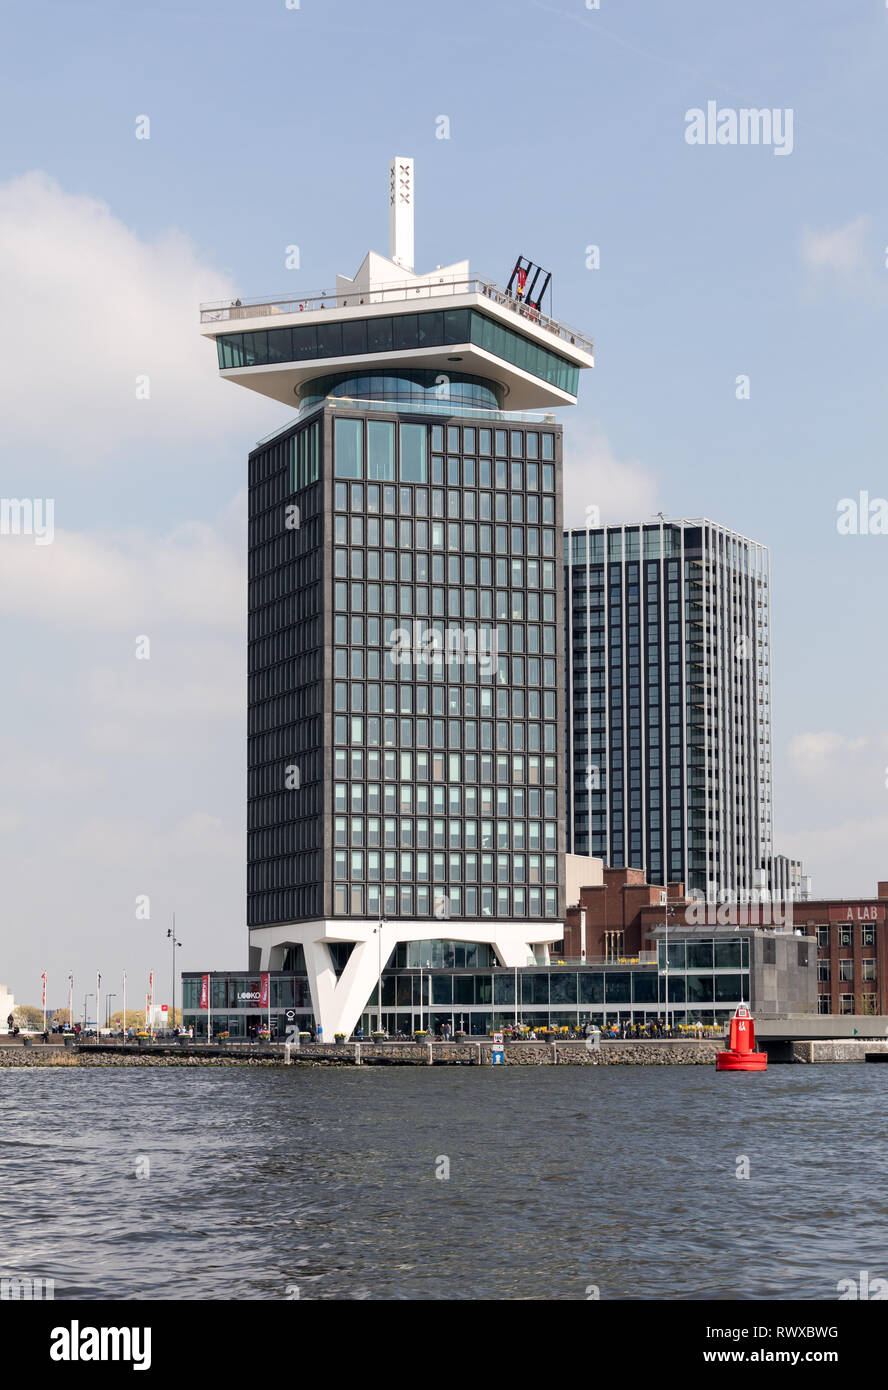 AMSTERDAM, NETHERLANDS - APRIL 20, 2017: EYE Film Institute Netherlands is located in Amsterdam in the Netherlands. It includes a cinematography museu Stock Photo